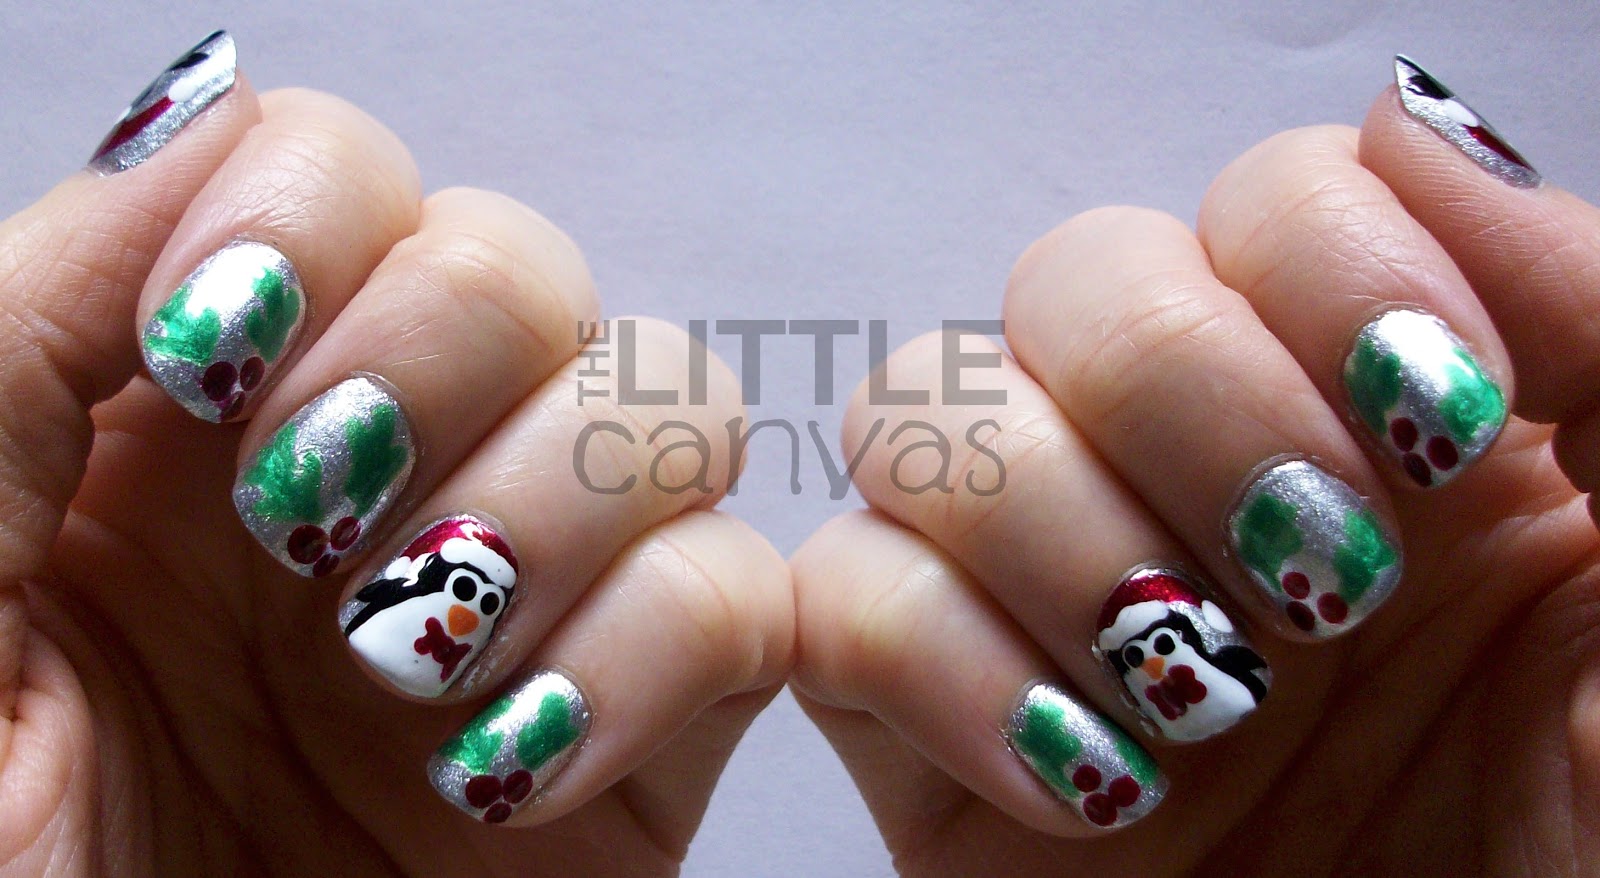 7. Fun and Easy Penguin Nail Art - wide 10